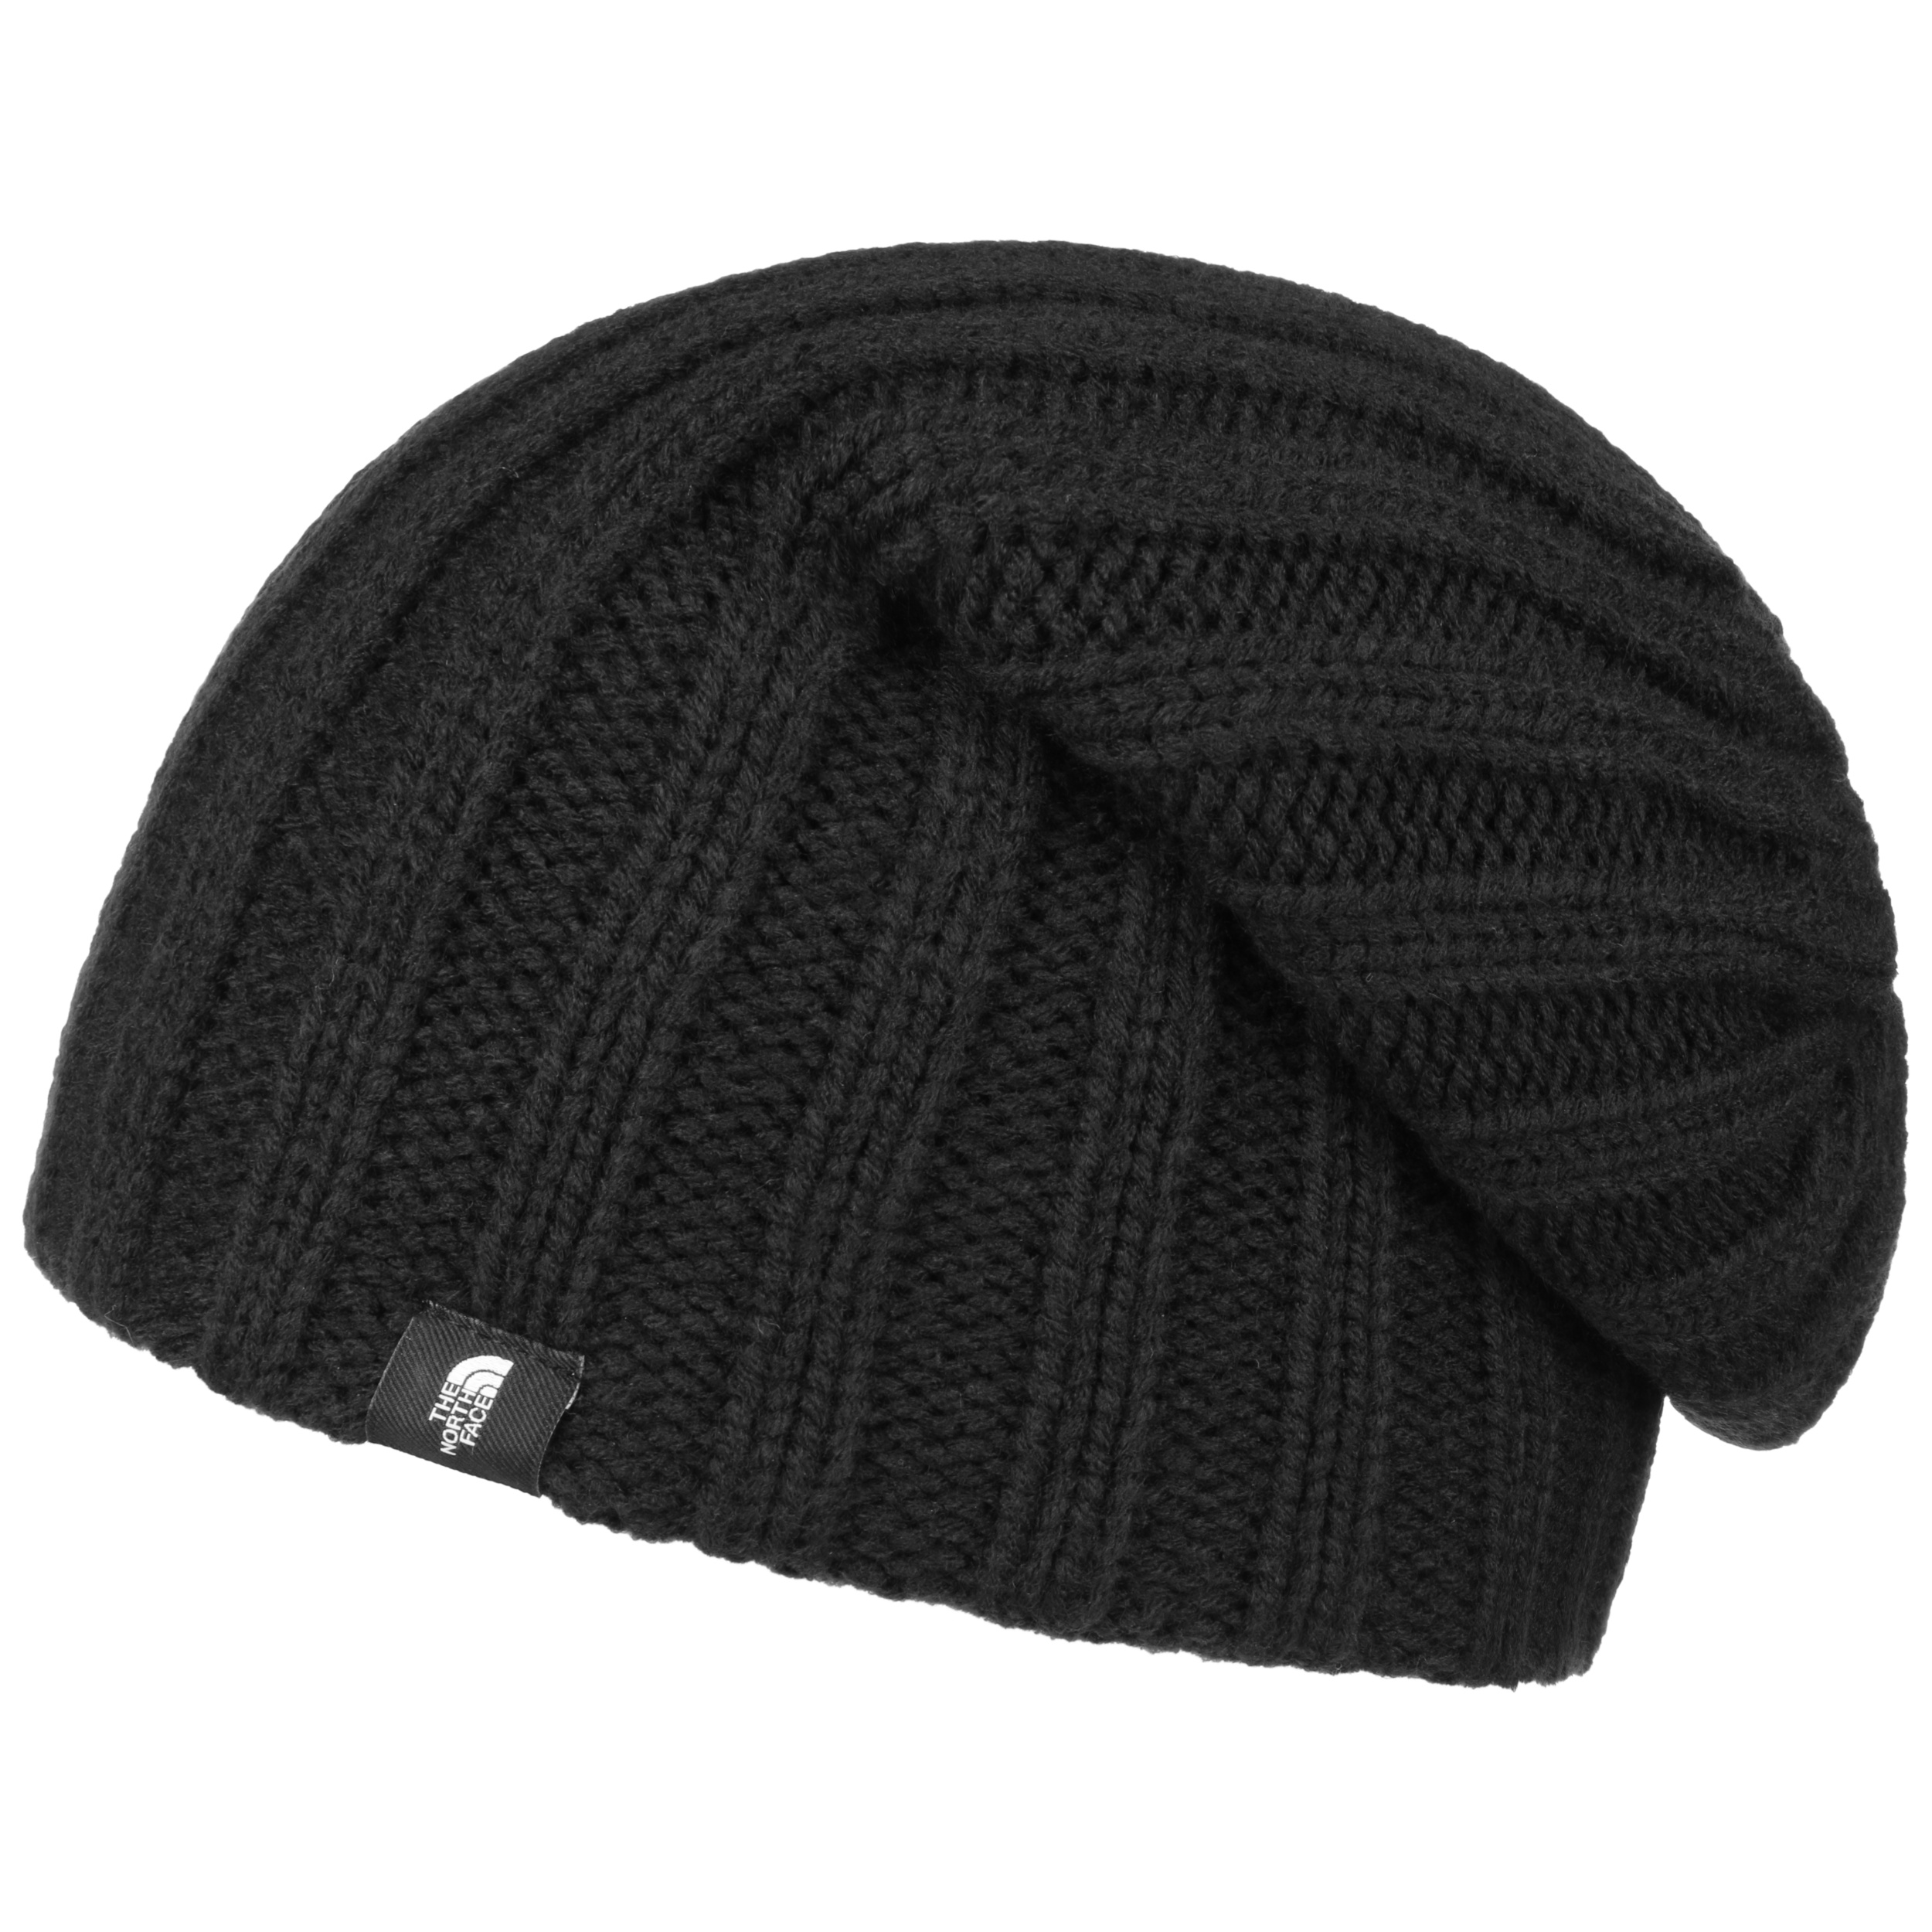 Shinsky Beanie Hat by The North Face 